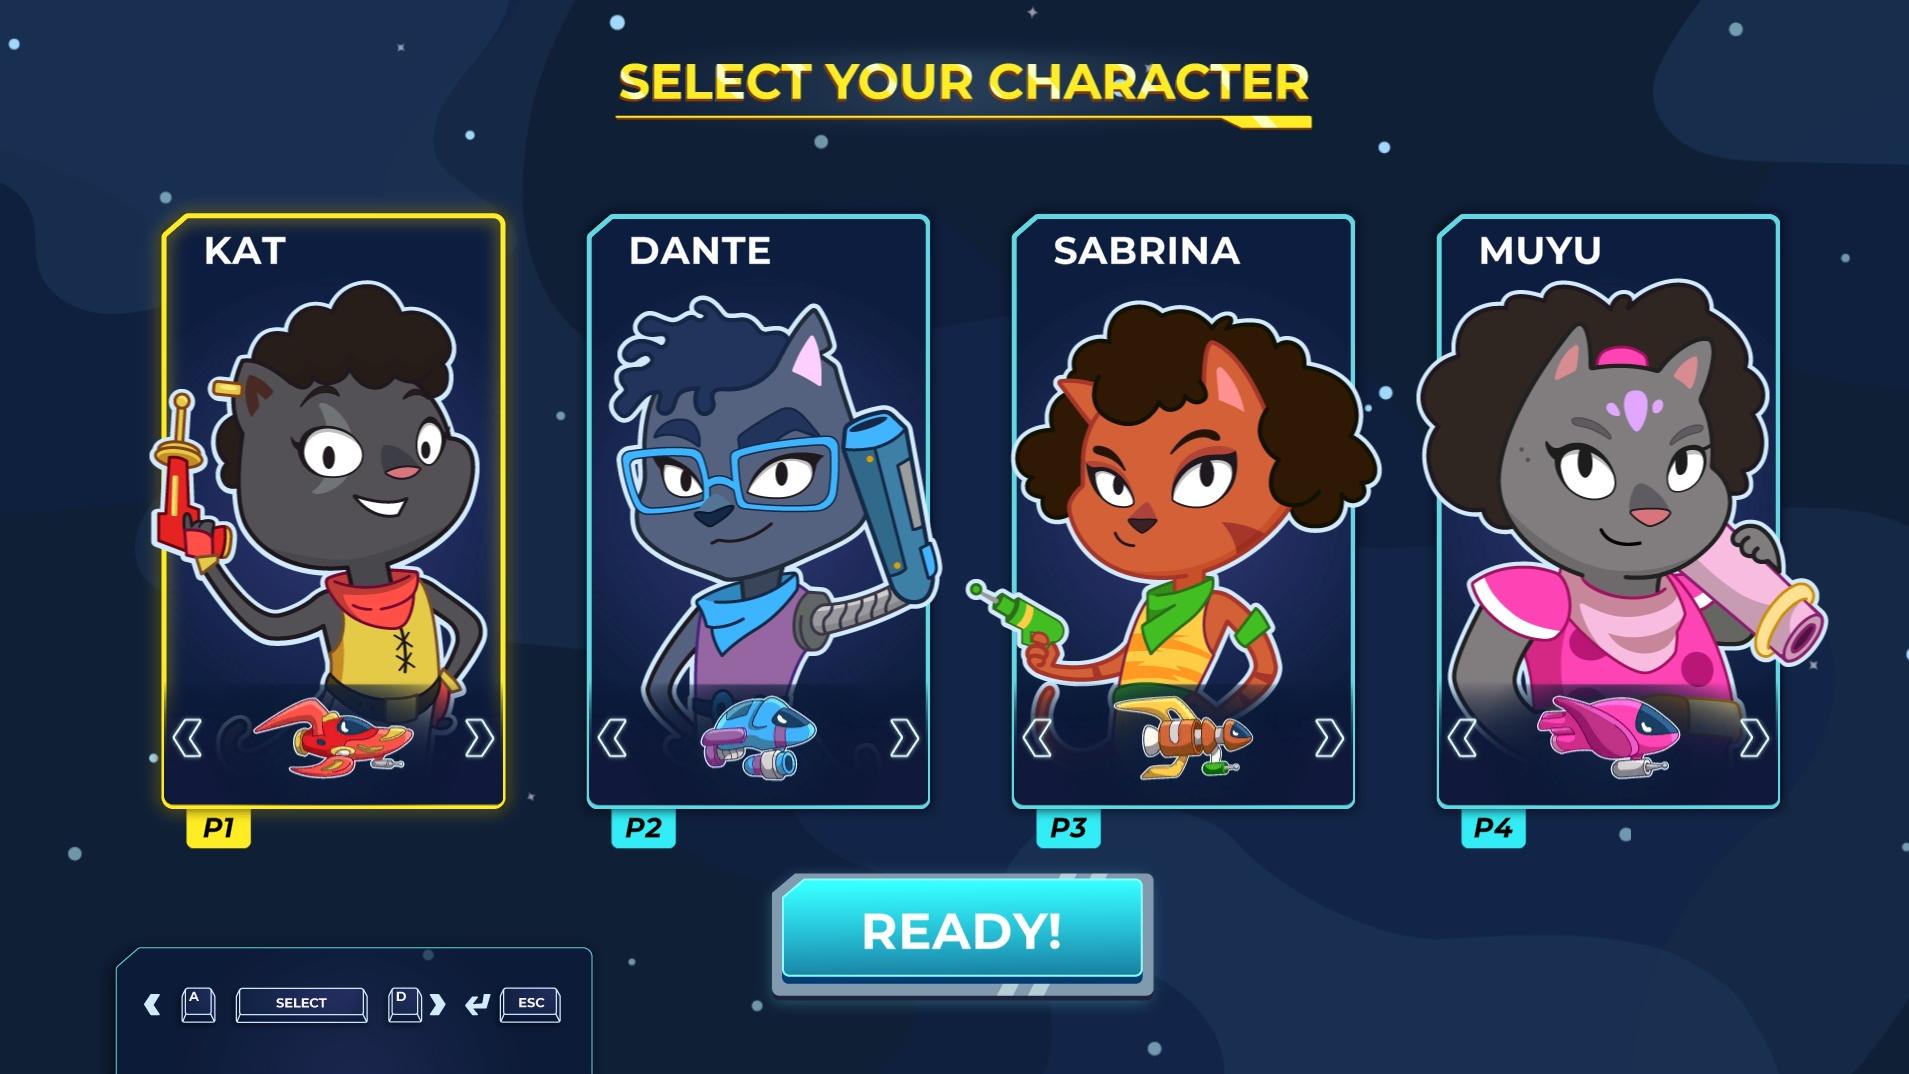 Character selection screen from Galactic Kittens sample game.